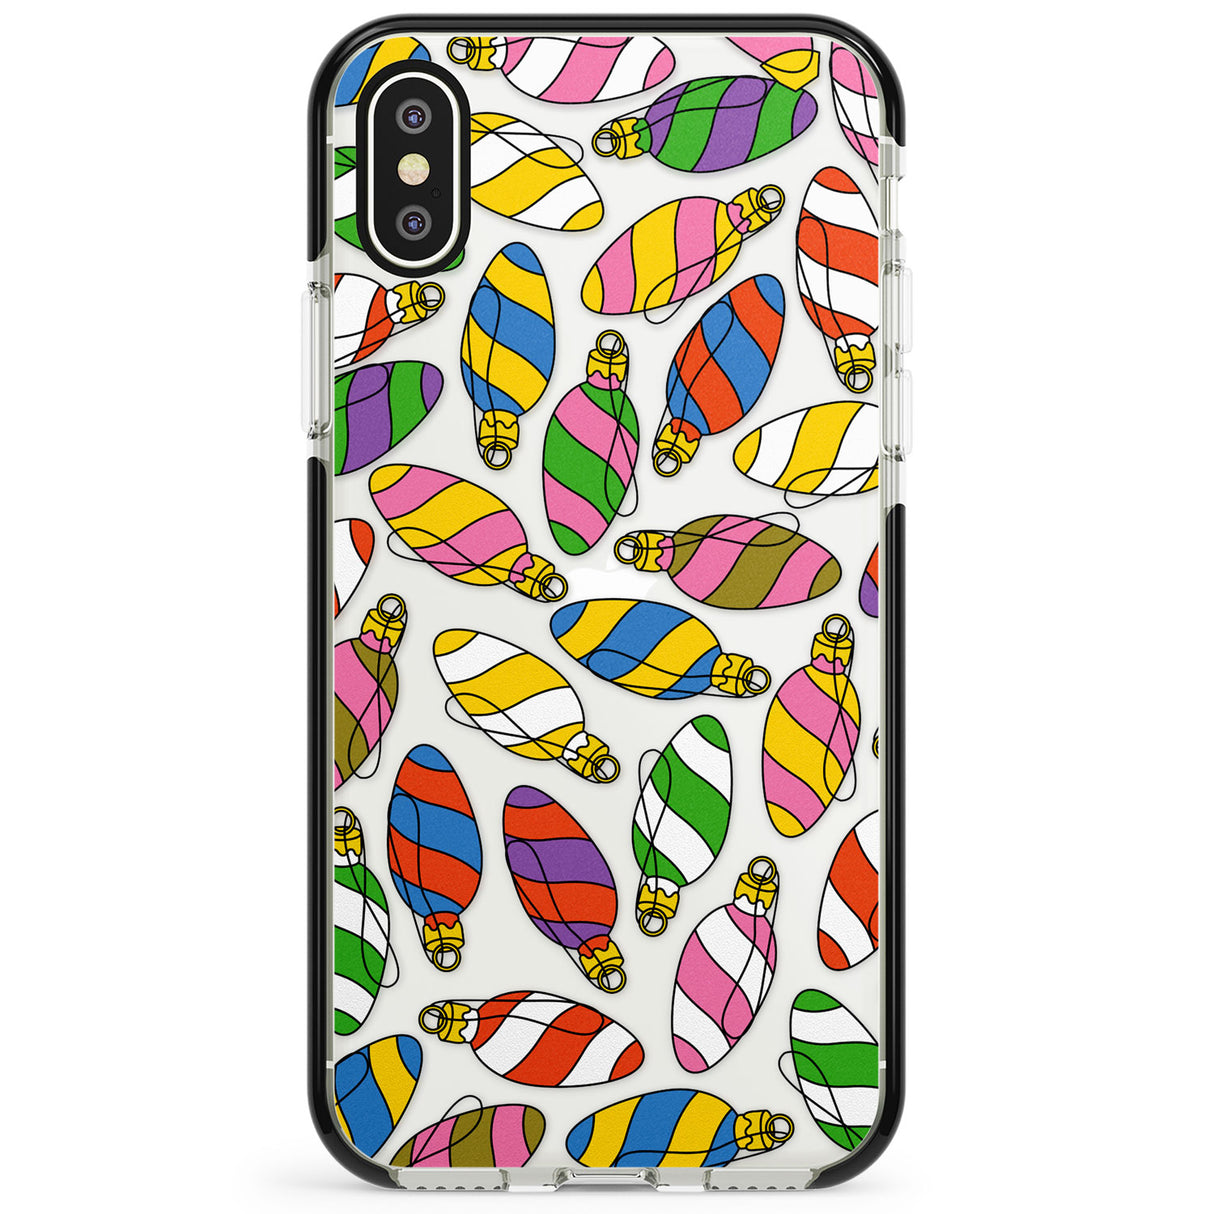 Colourful Holiday Ornaments Phone Case for iPhone X XS Max XR